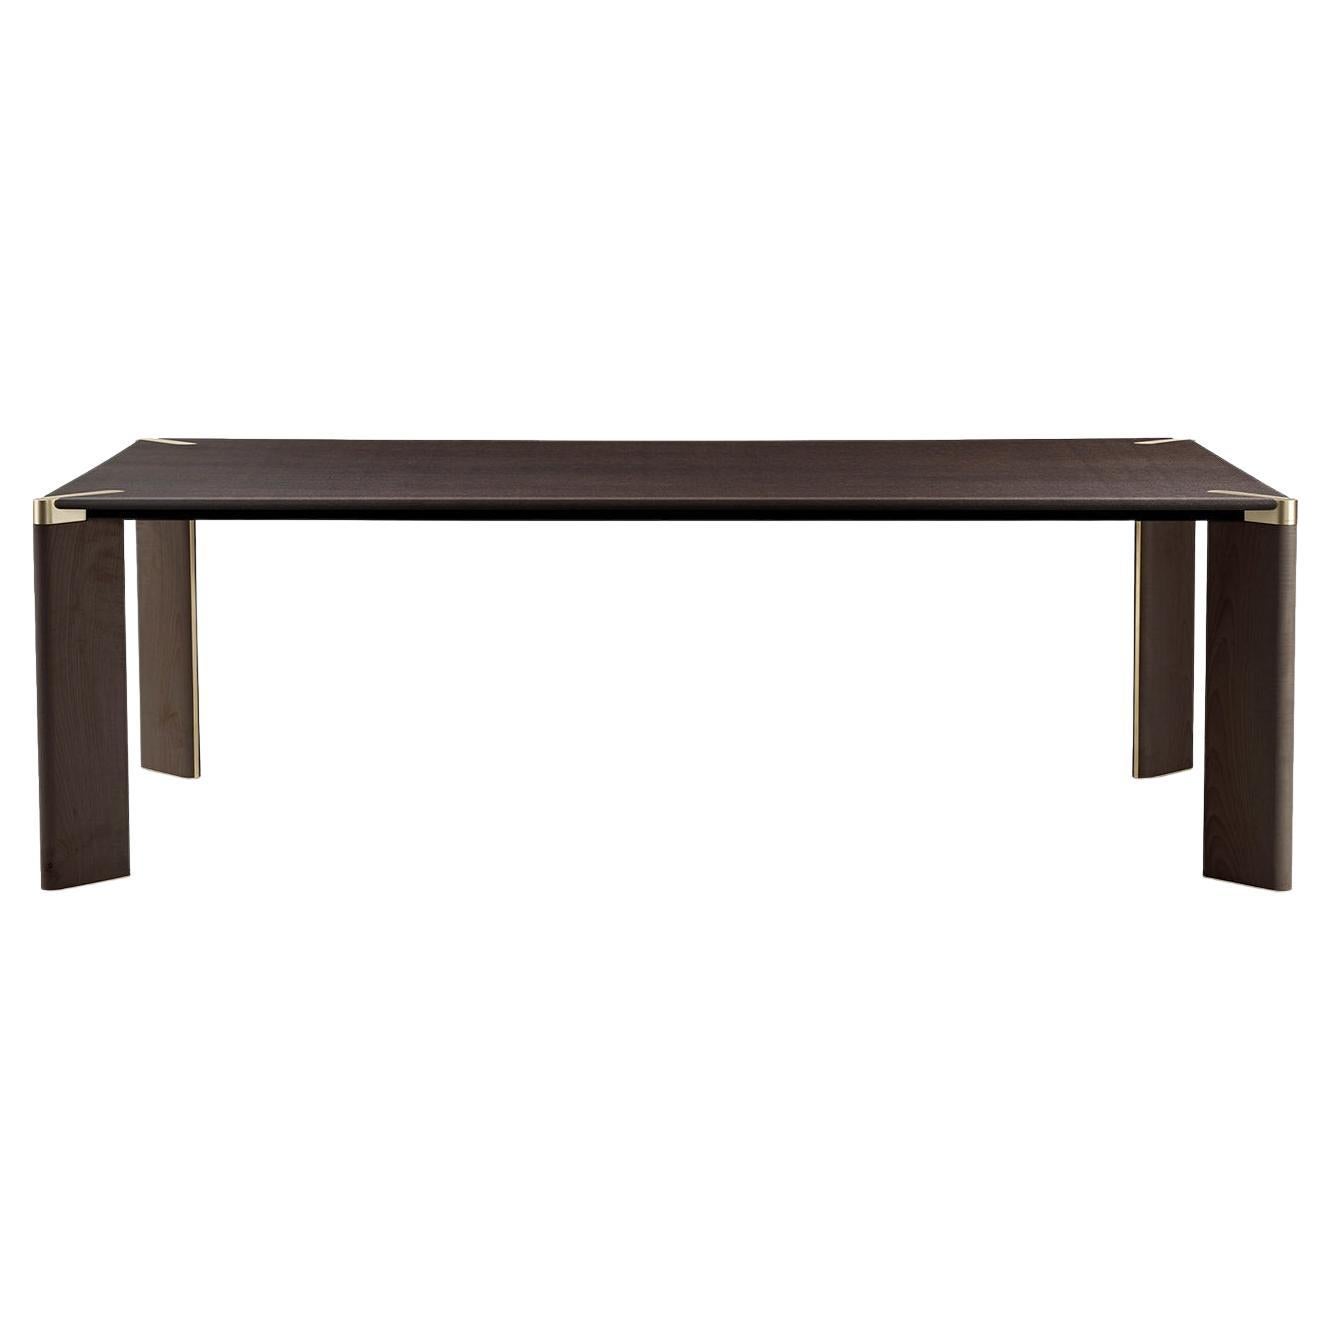 Ottanta Rectangular Wooden Dining Table by Lorenza Bozzoli For Sale